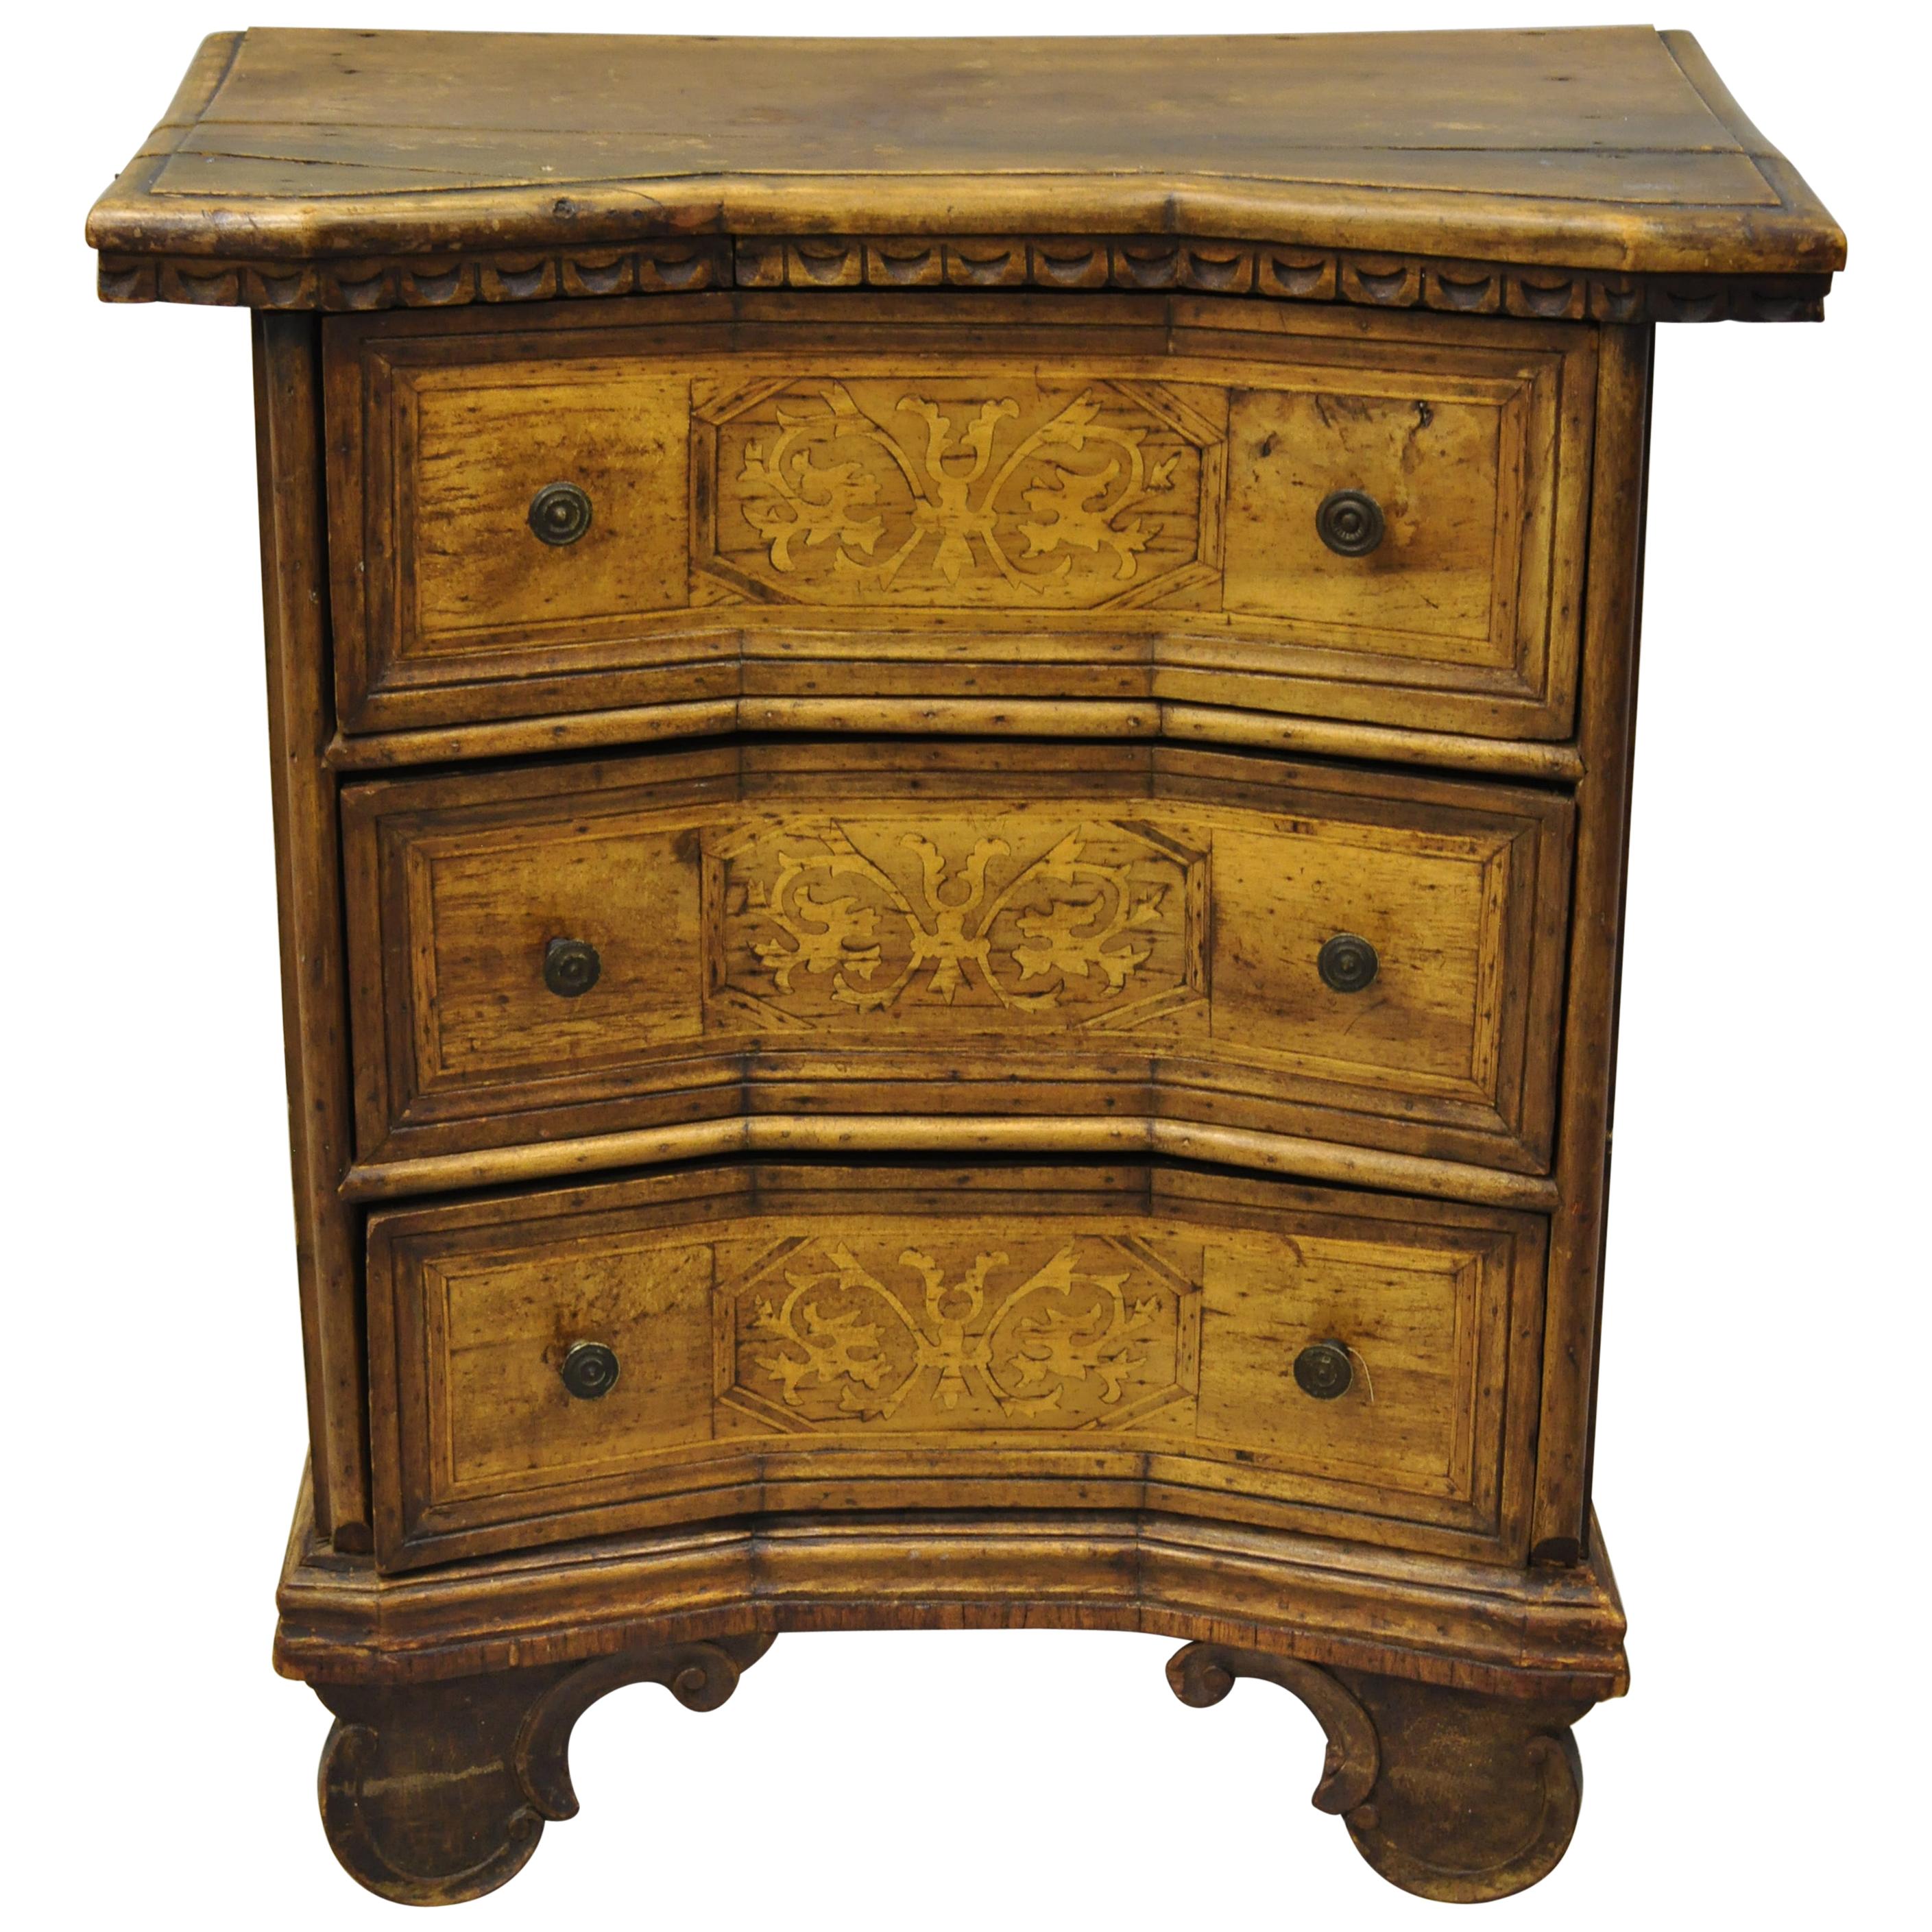 Antique Italian Continental 3-Drawer Inlaid Walnut Commode Chest Nightstand